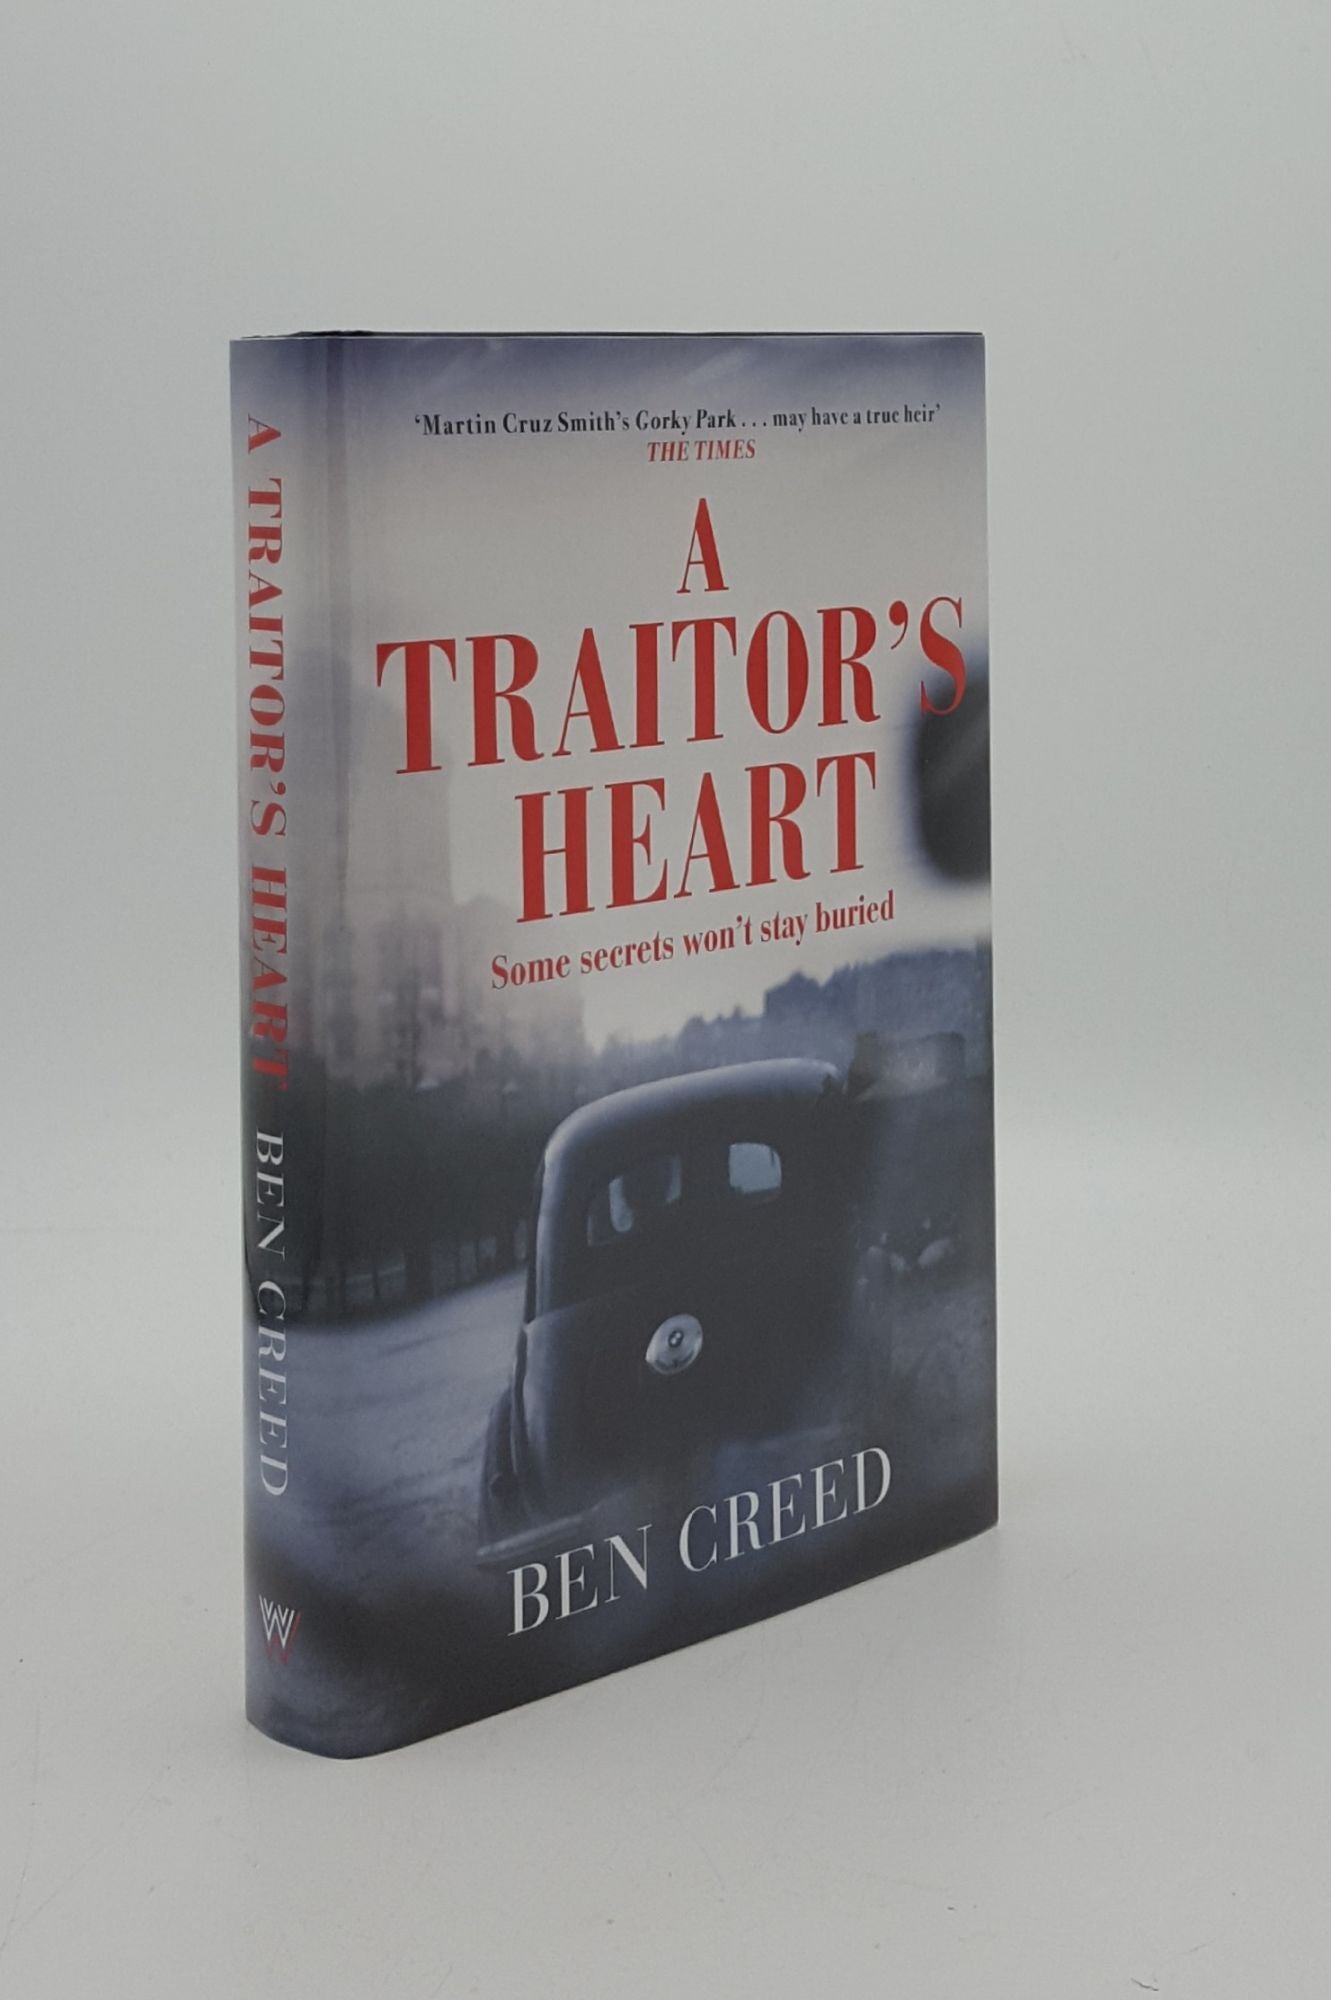 CREED Ben - A Traitor's Heart